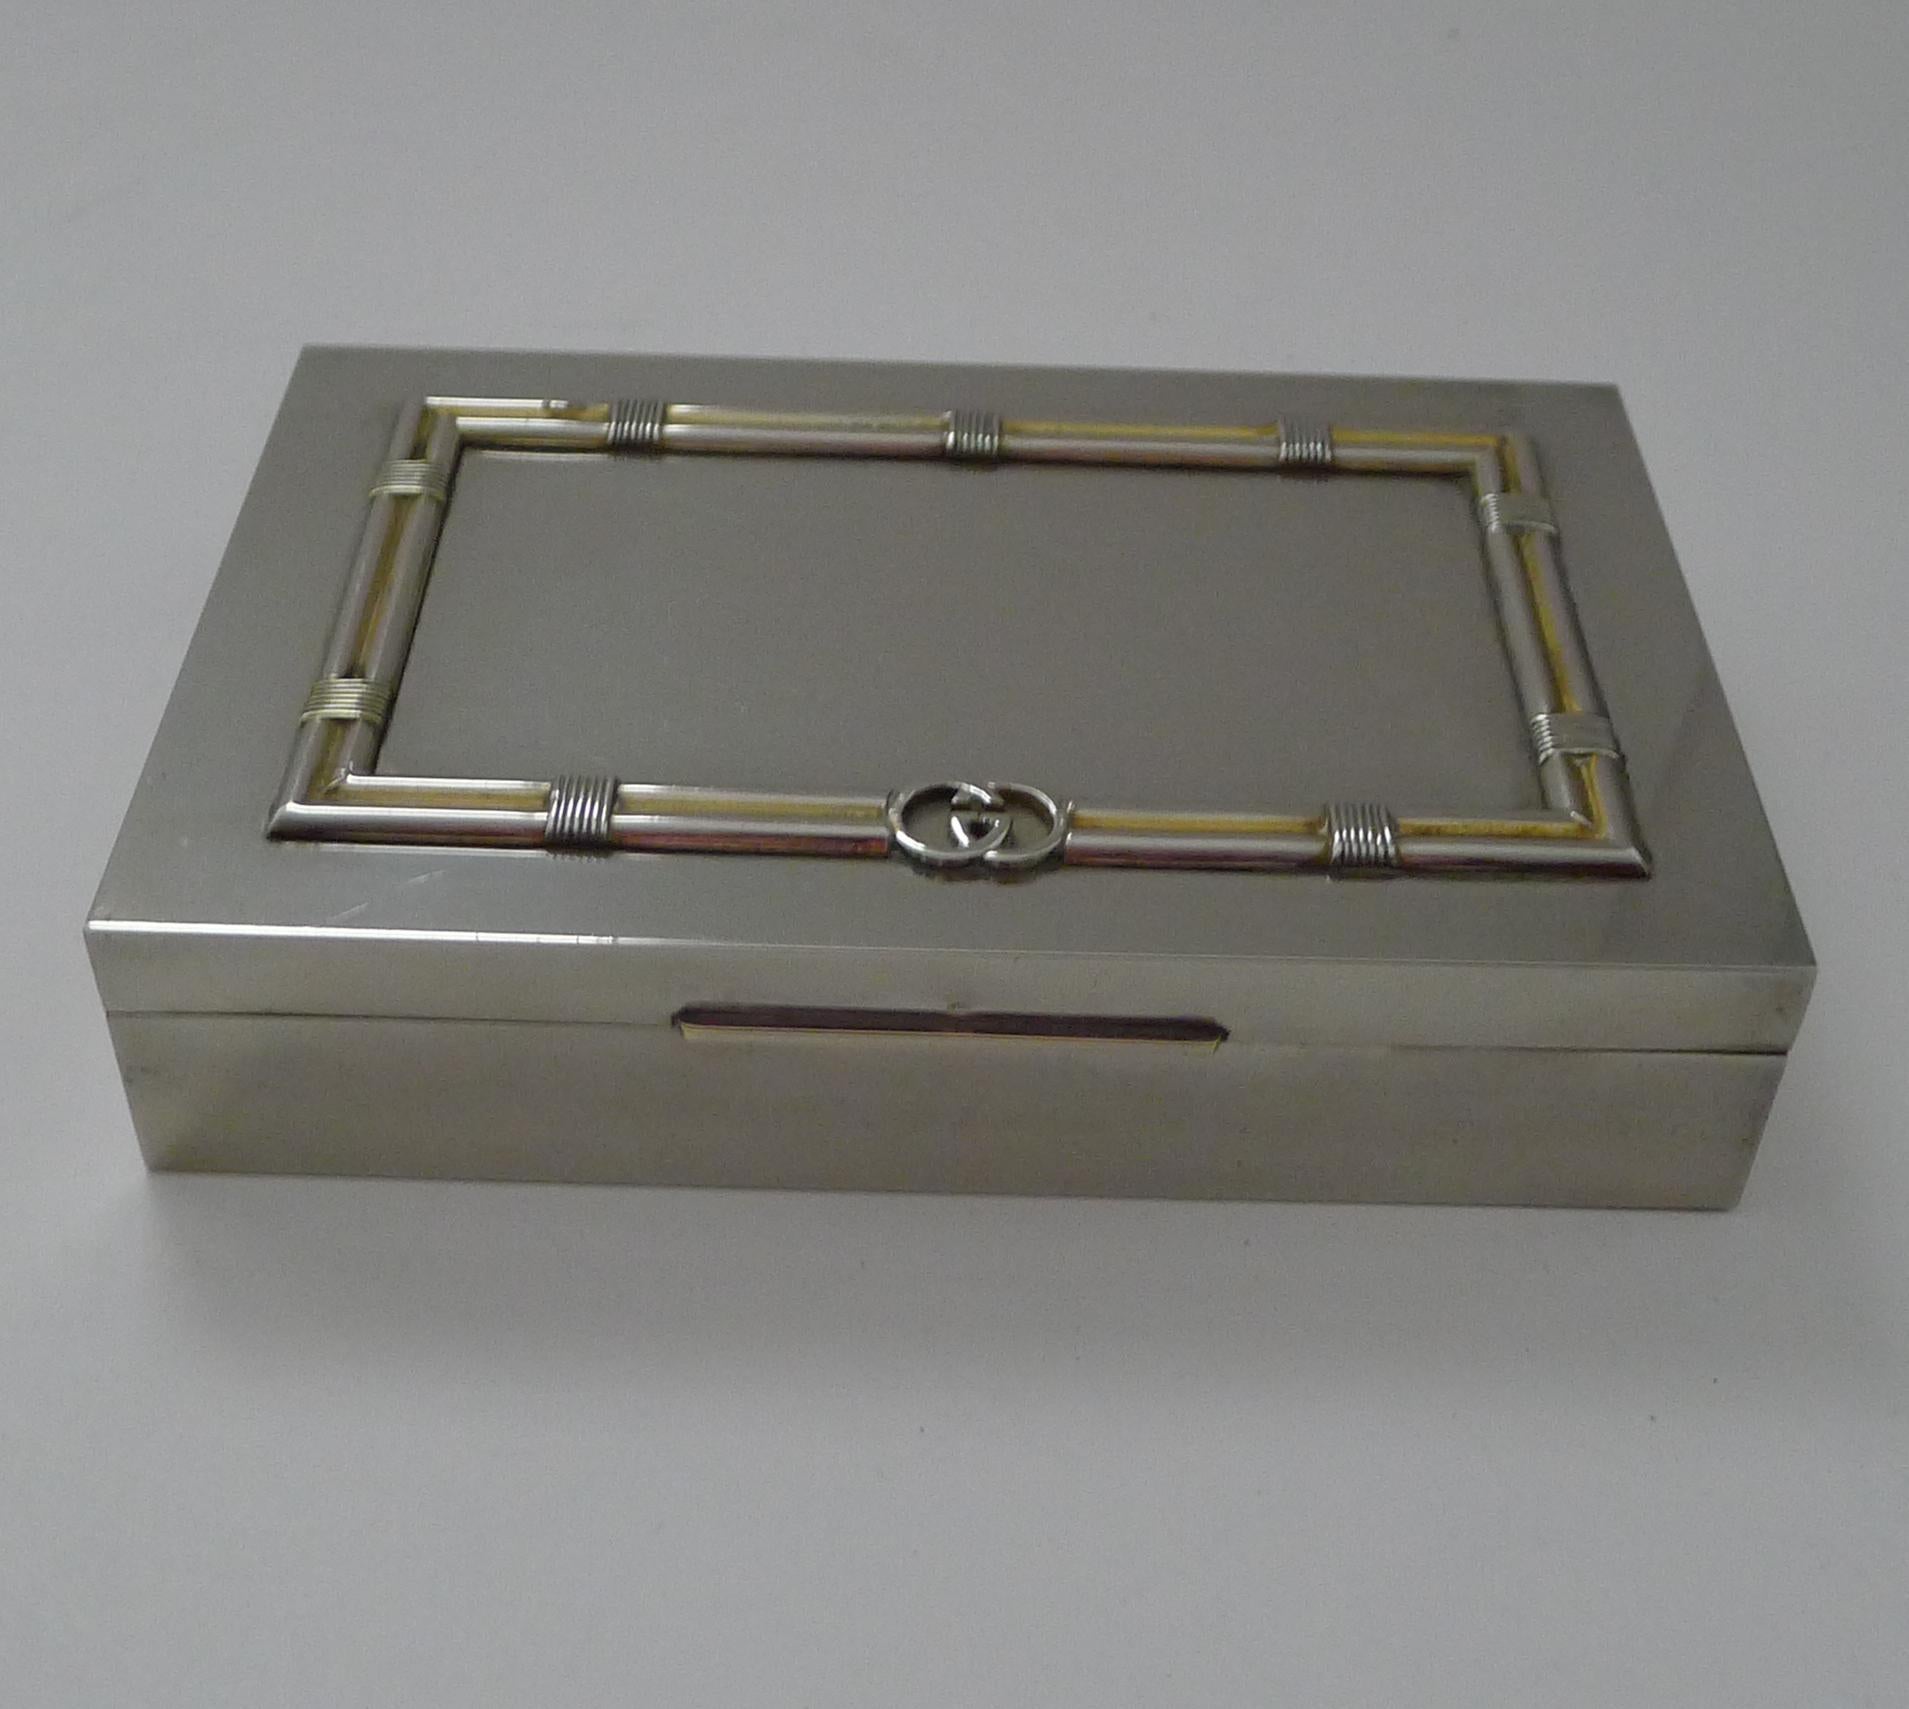 A truly striking and very rare box by the iconic designer, Gucci, Italy.  What makes this one so very special is that is made from solid 800/100 silver rather than the usual silver plate; this is the first solid silver example I have come